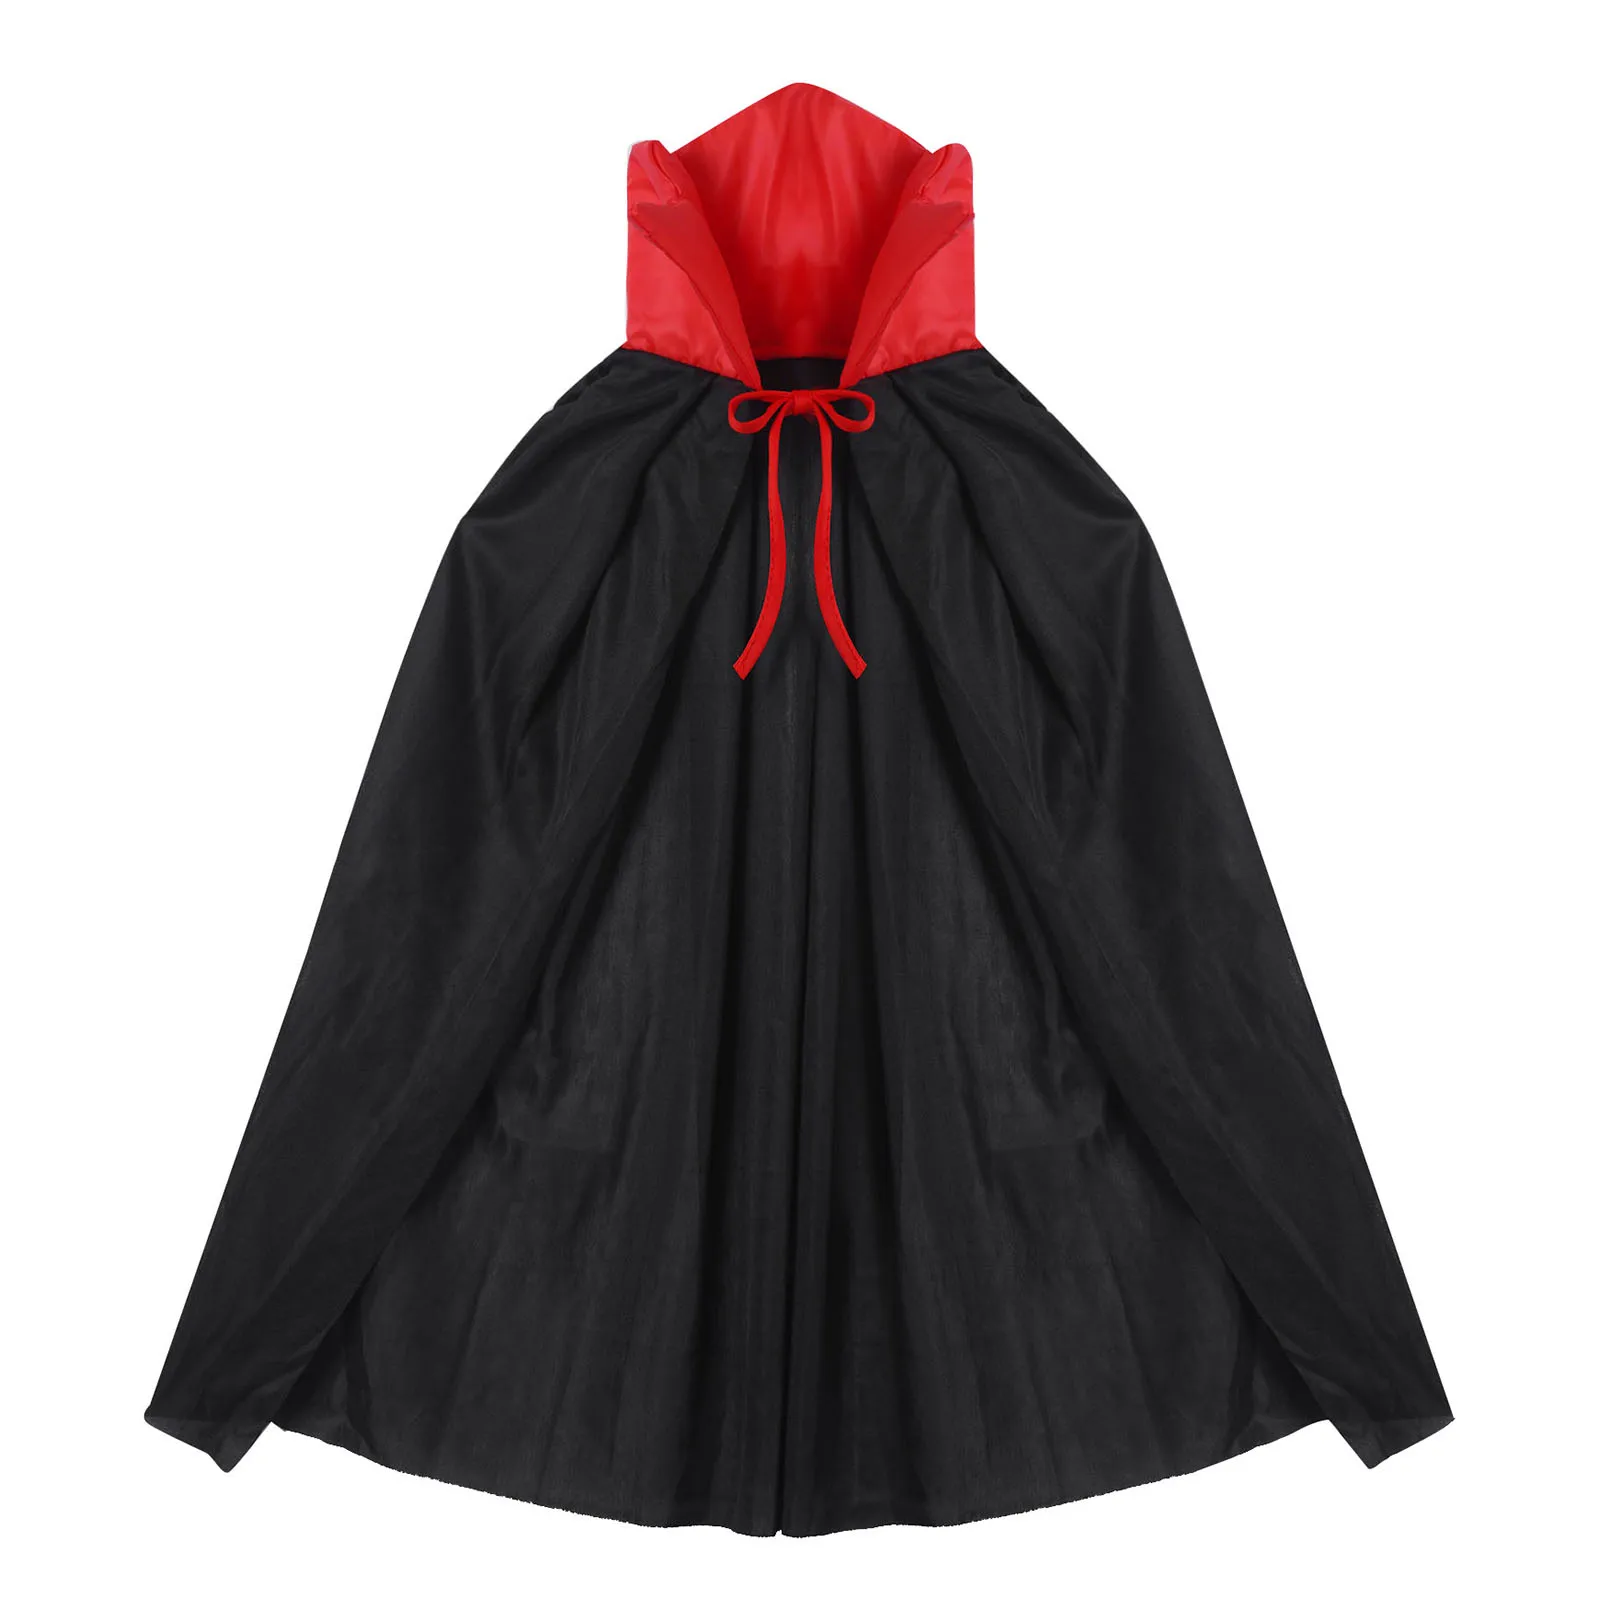 

Kids Halloween Cosplay Prince Vampire Cloak Cape Triangle Stand Collar Straps Self Tie Carnival Party Performance Dress Up Cloak